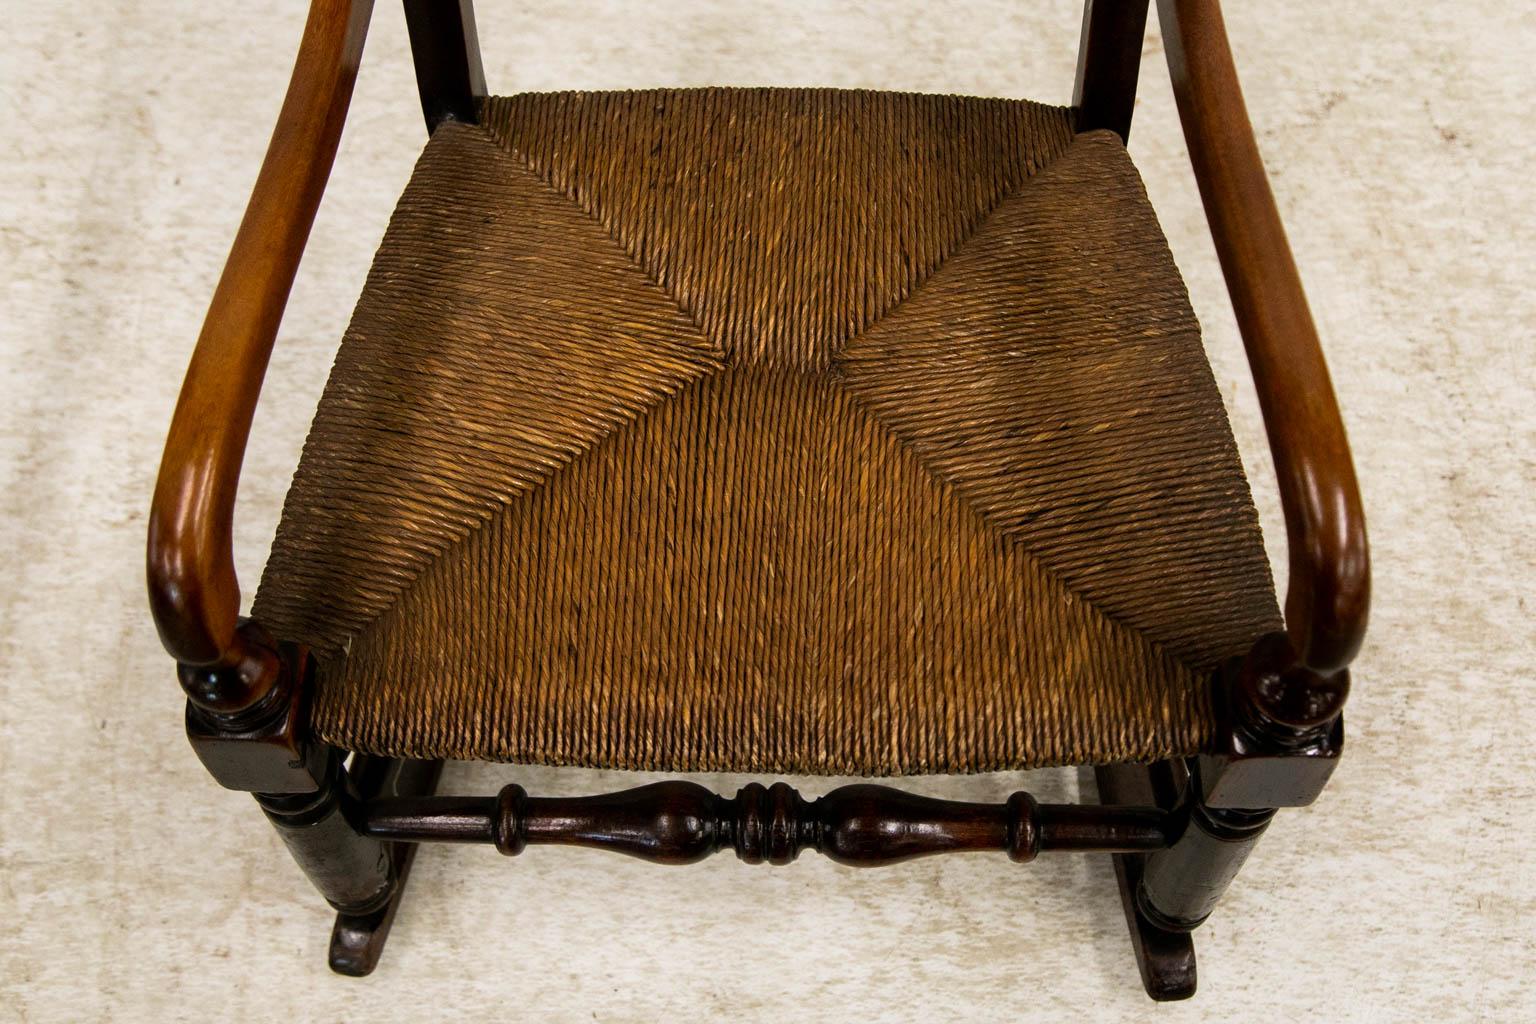 This fruitwood rocking chair has a double spindle gallery backsplat. The original rush seat is in mint condition. The ogee shaped arms are supported by turned legs which are in turn supported by a single turned stretcher in the front and double